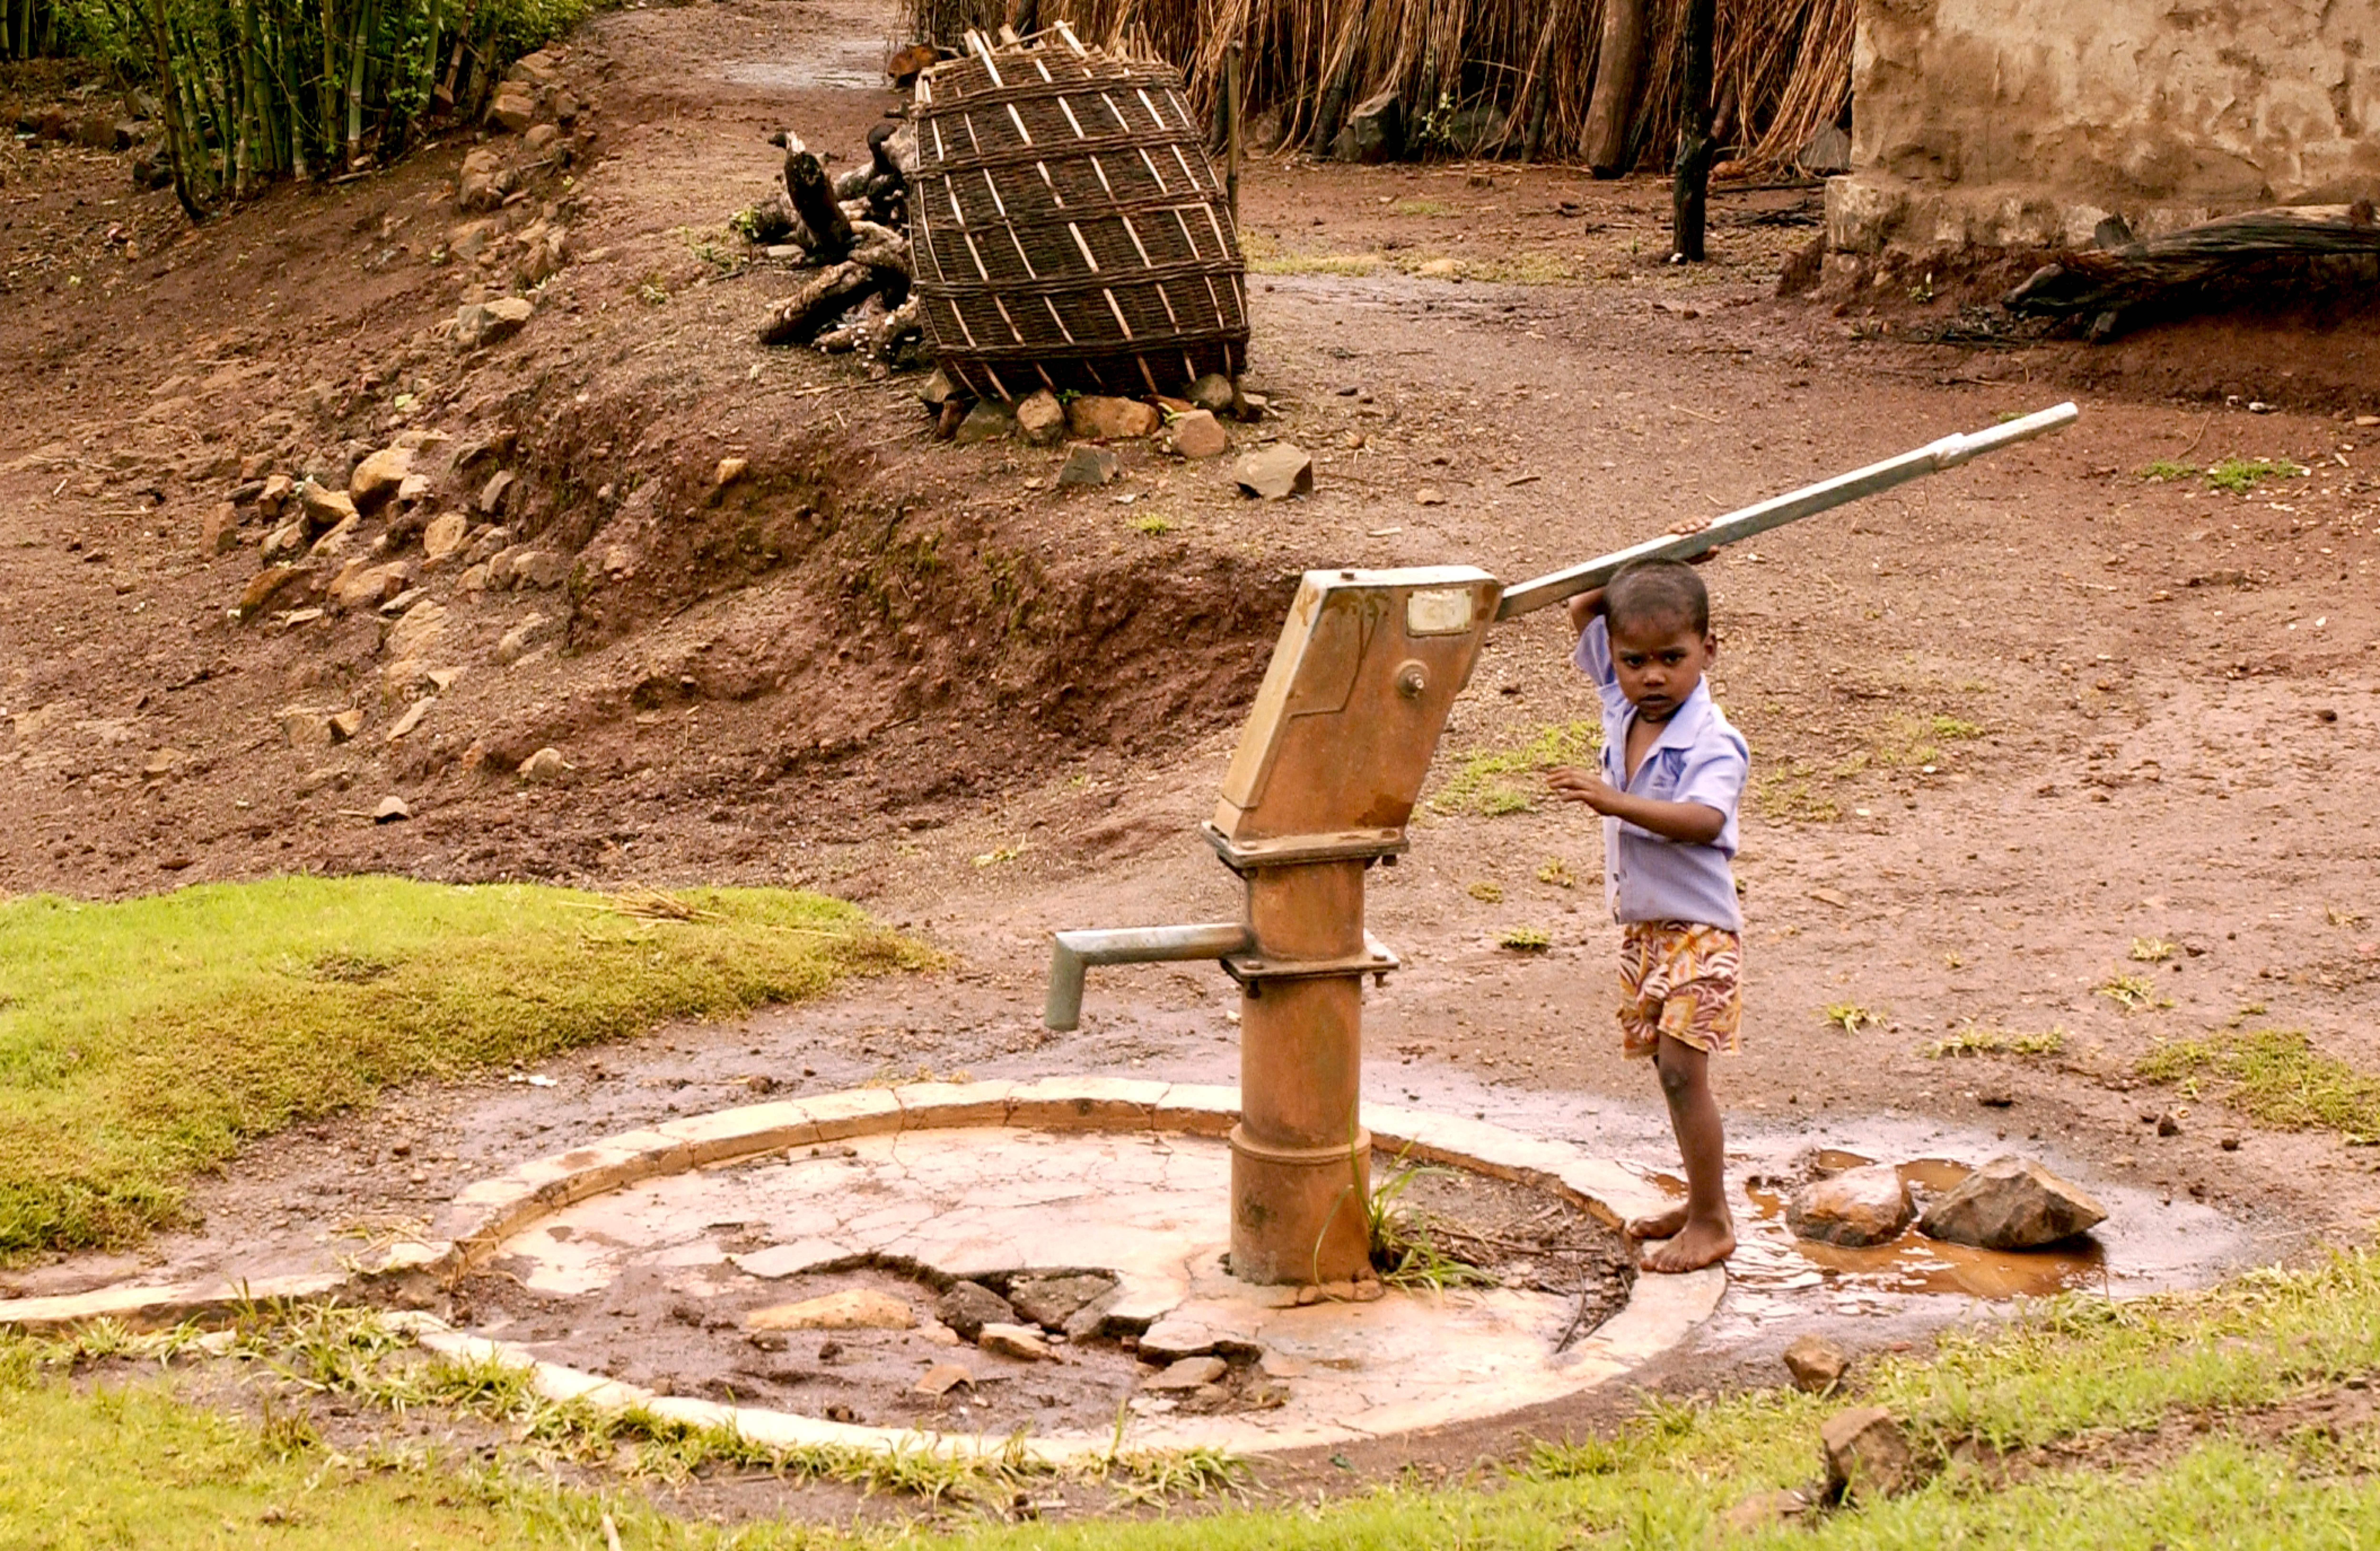 A young boy pumping water from a community spigot.